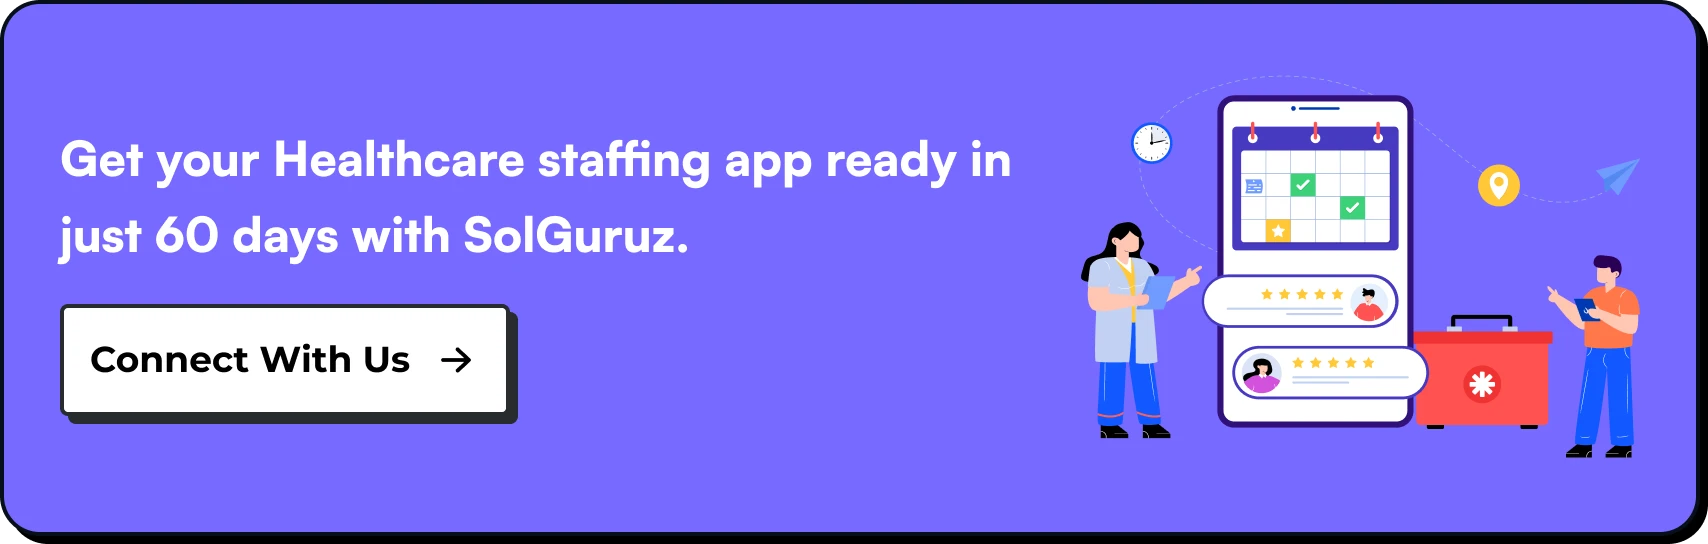 Get your Healthcare staffing app ready in just 60 days with SolGuruz